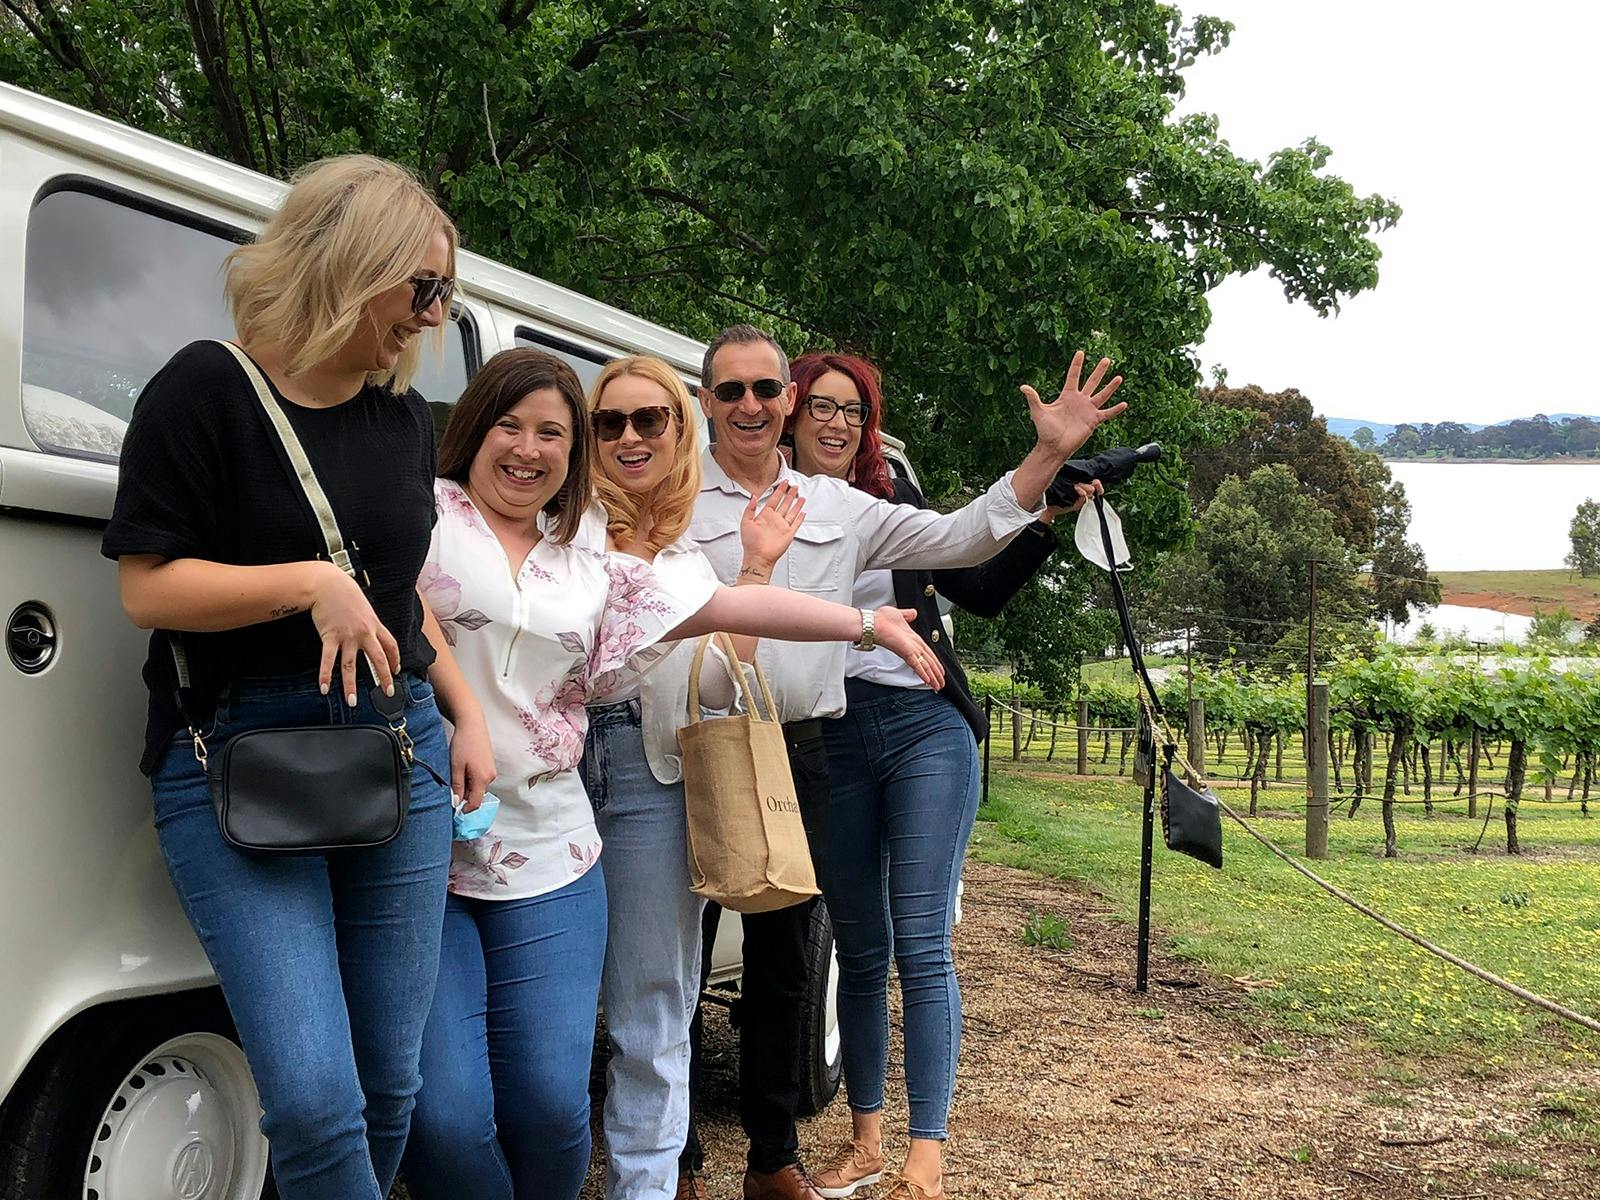 Guests loving the kombi tour experience